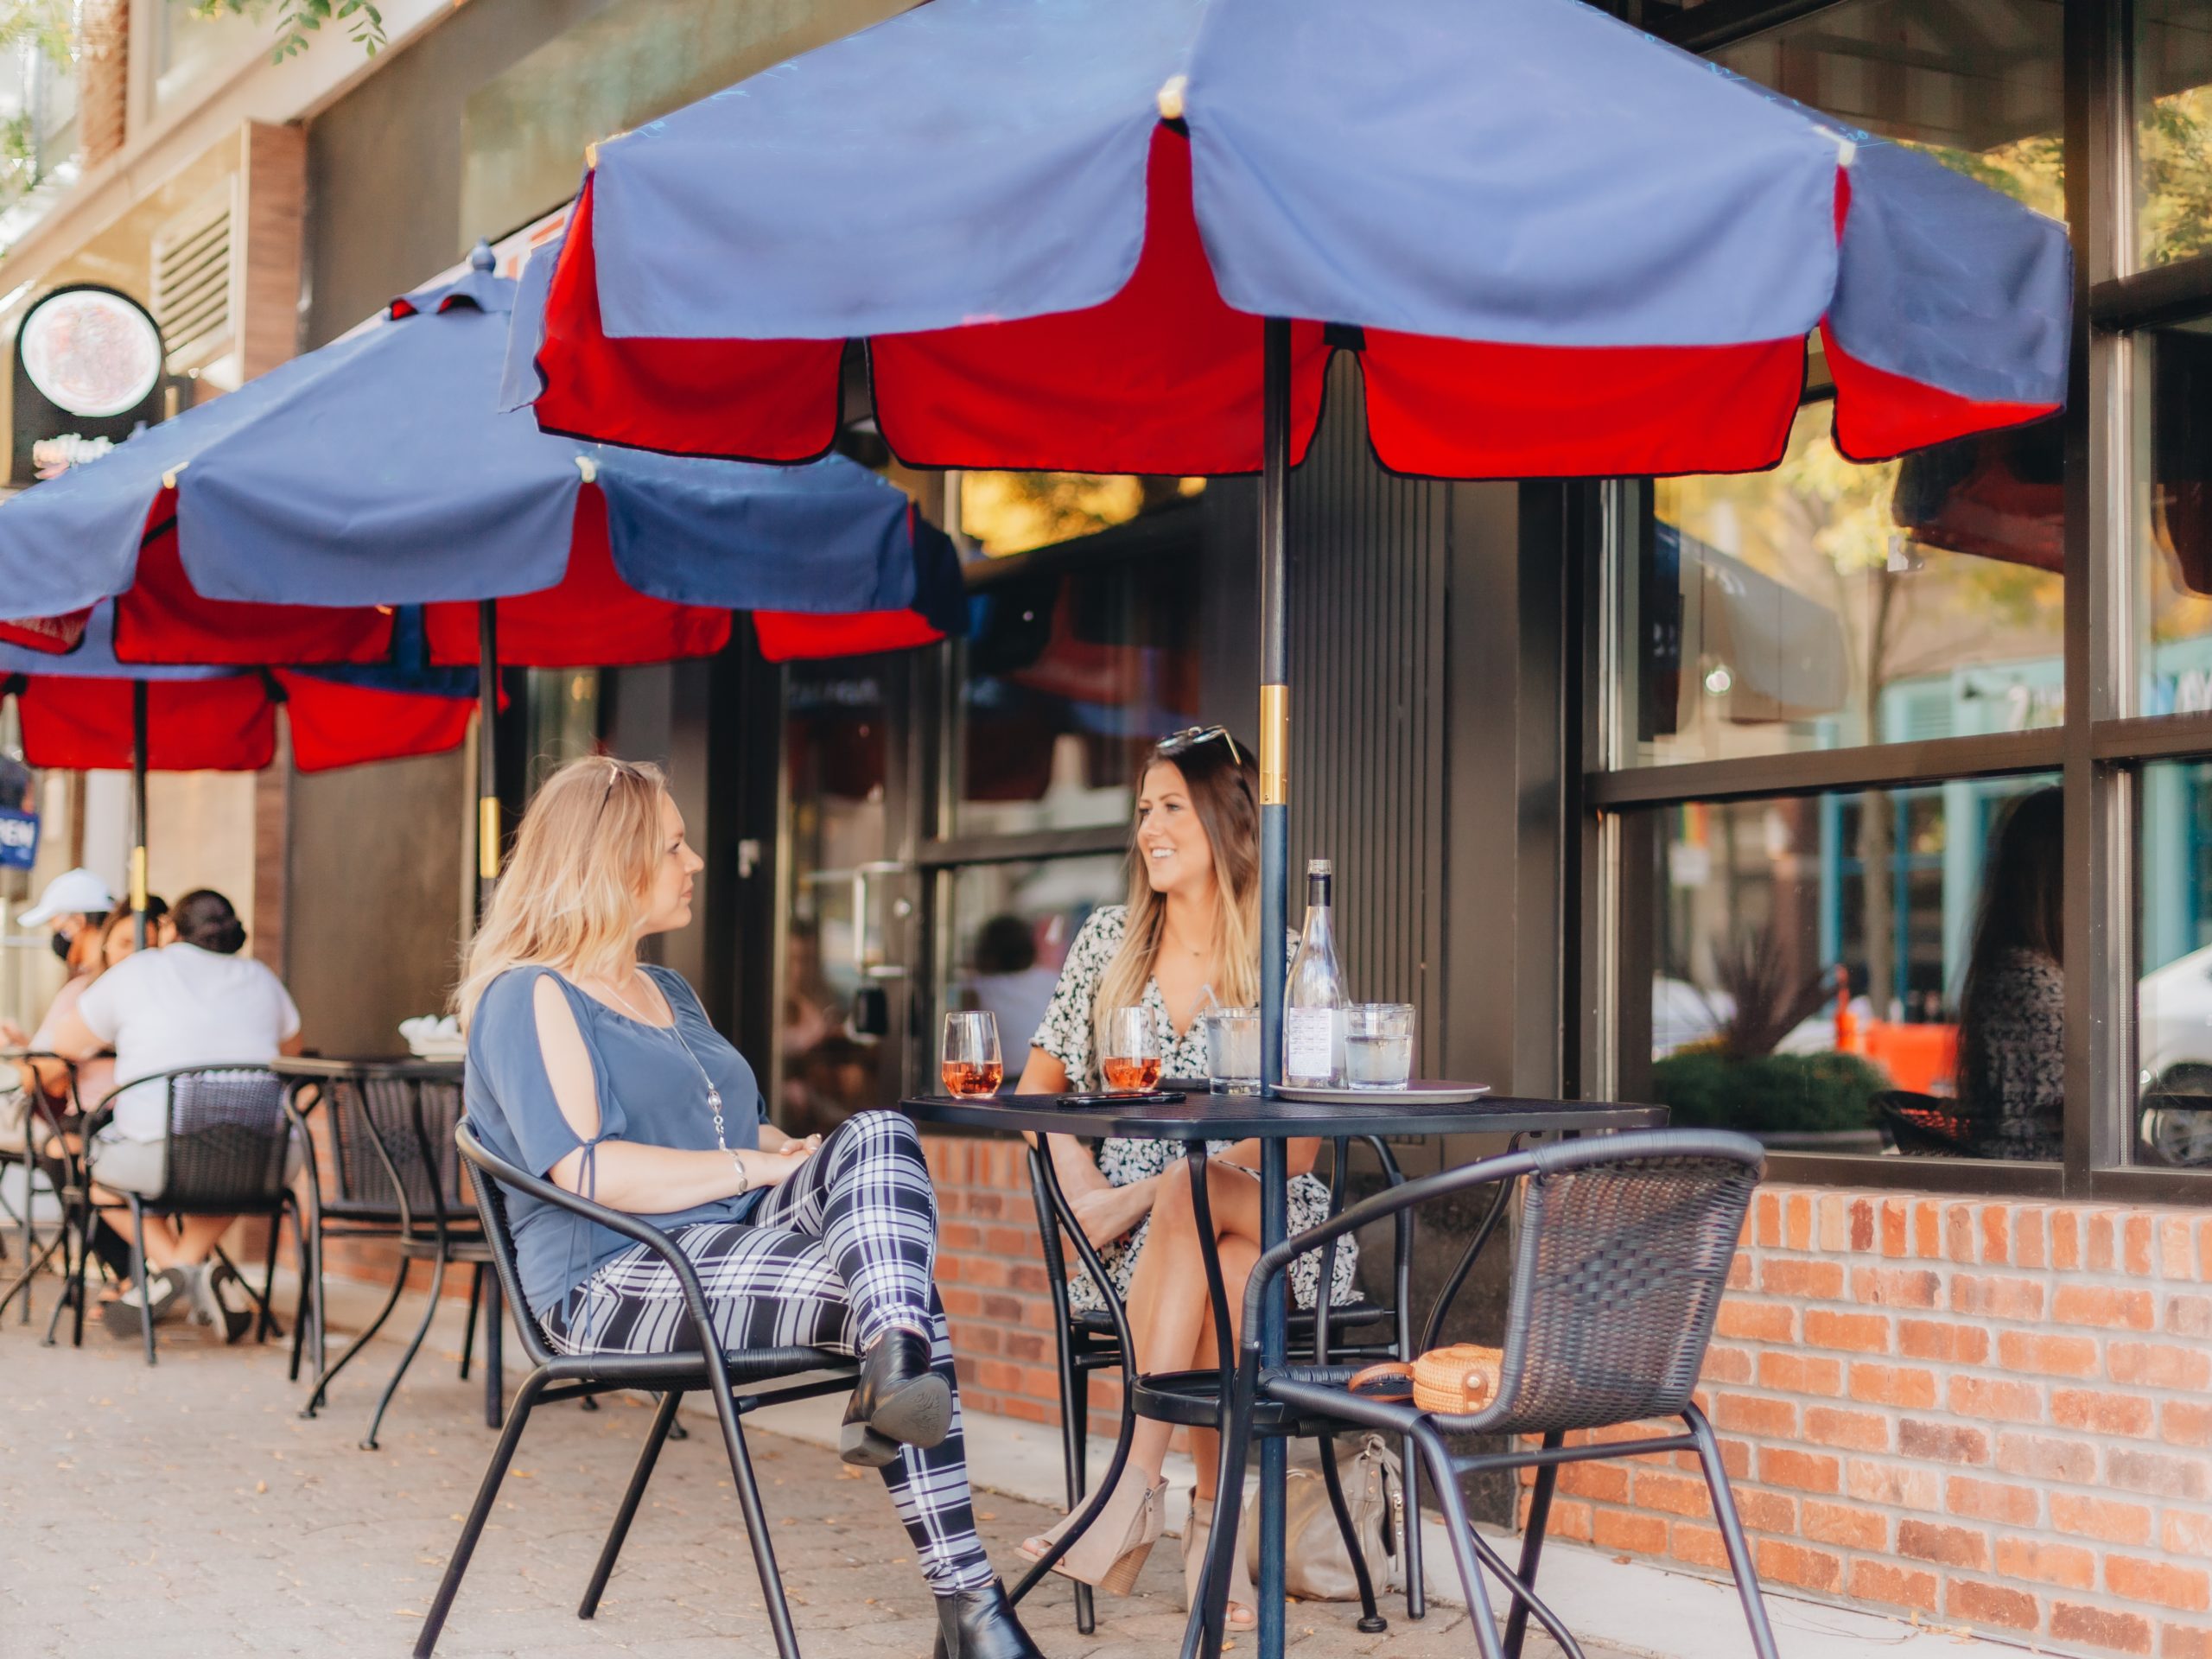 Two women dining outside in California